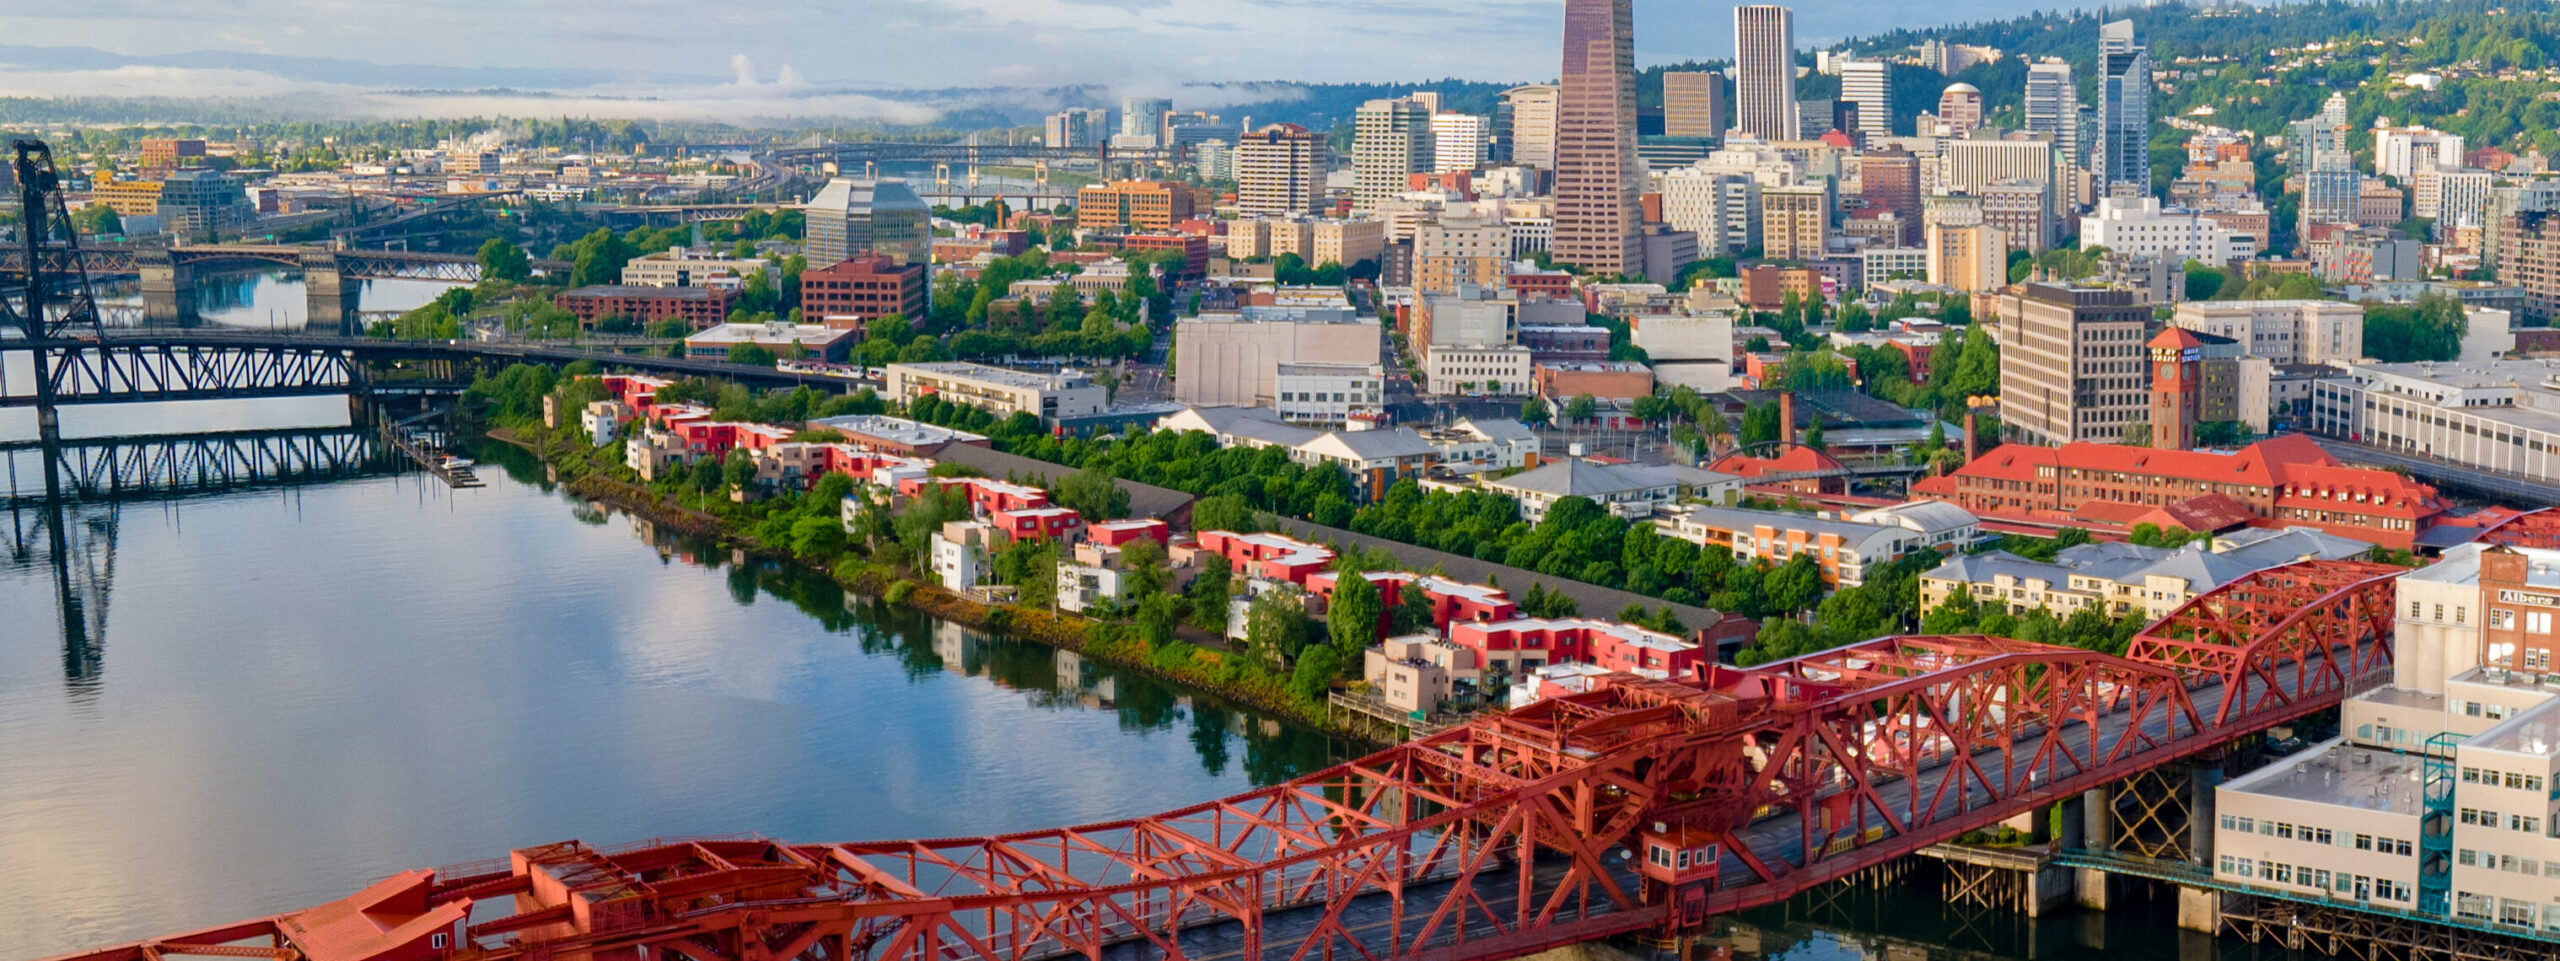 A bird's eye view of the Portland skyline showing the NW Pearl District